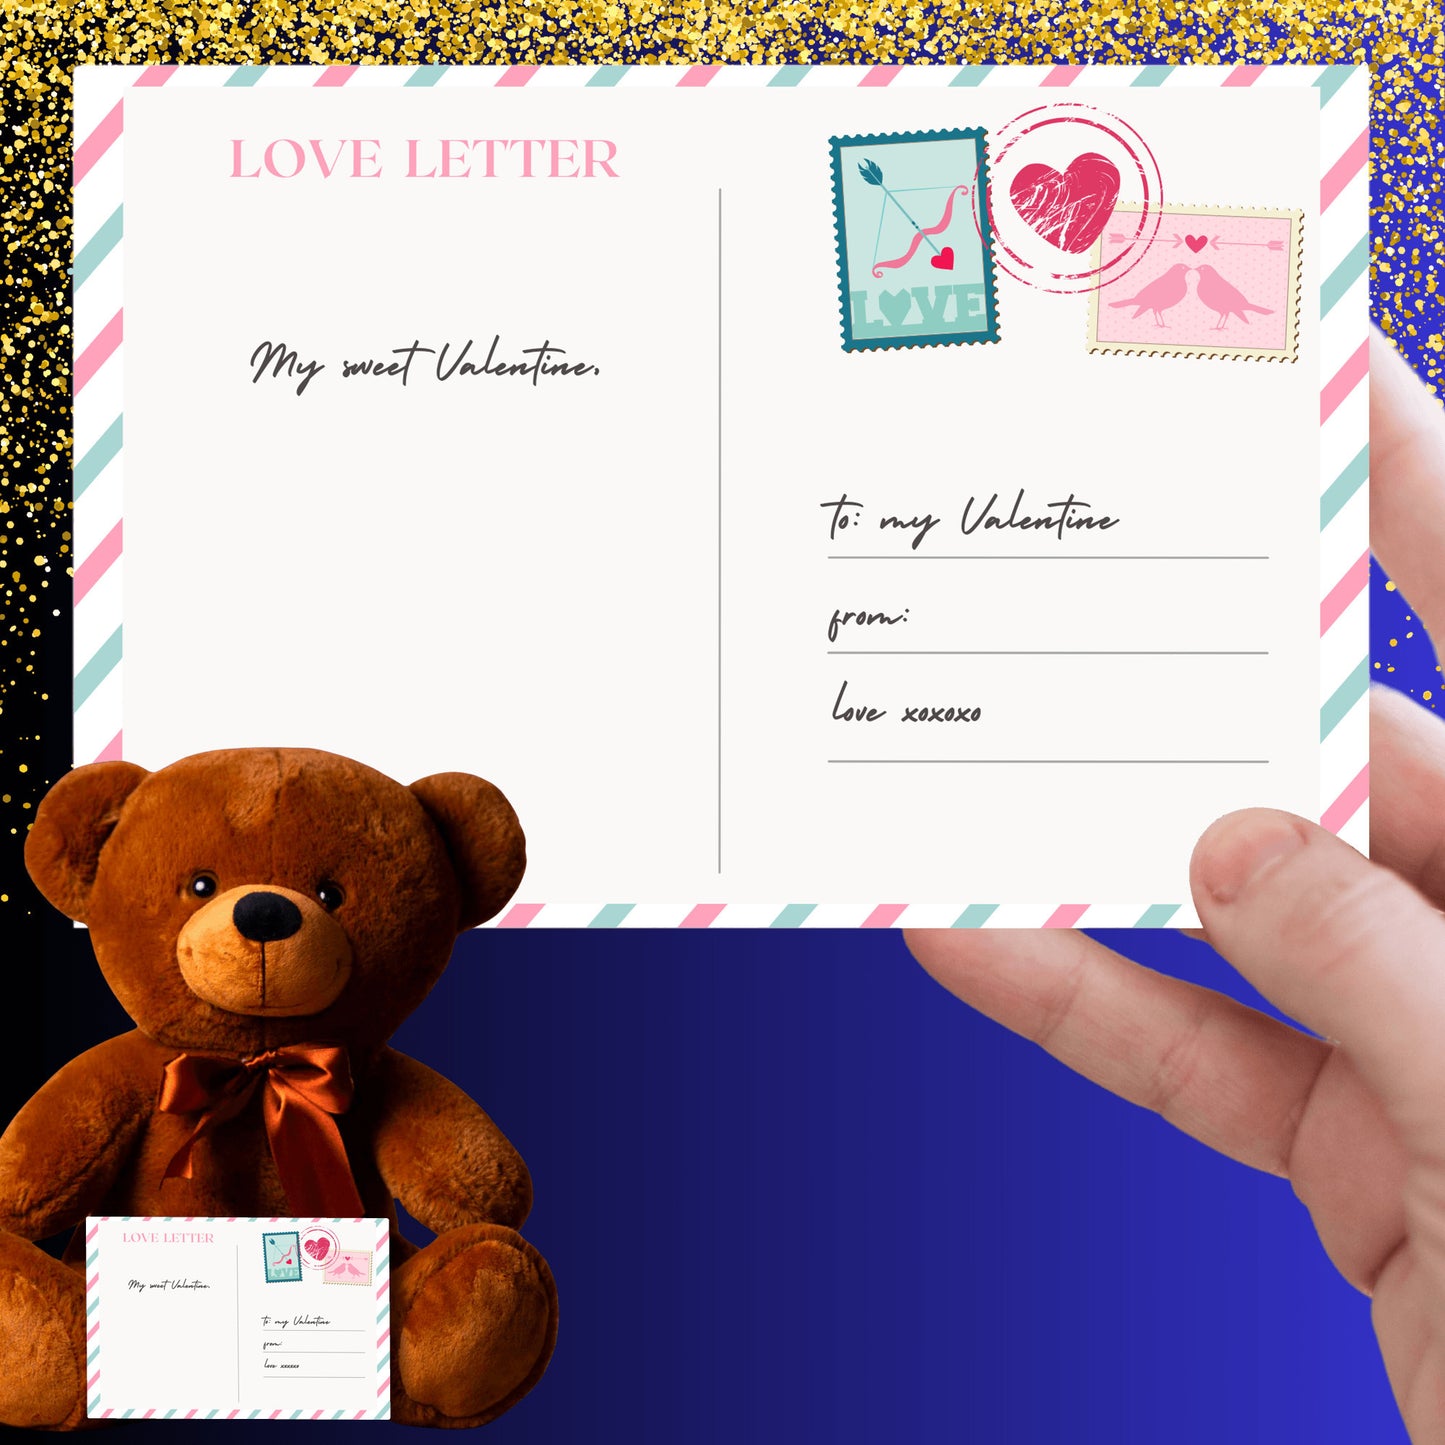 Valentine's Day Letter with Teddy Bear, can write on back